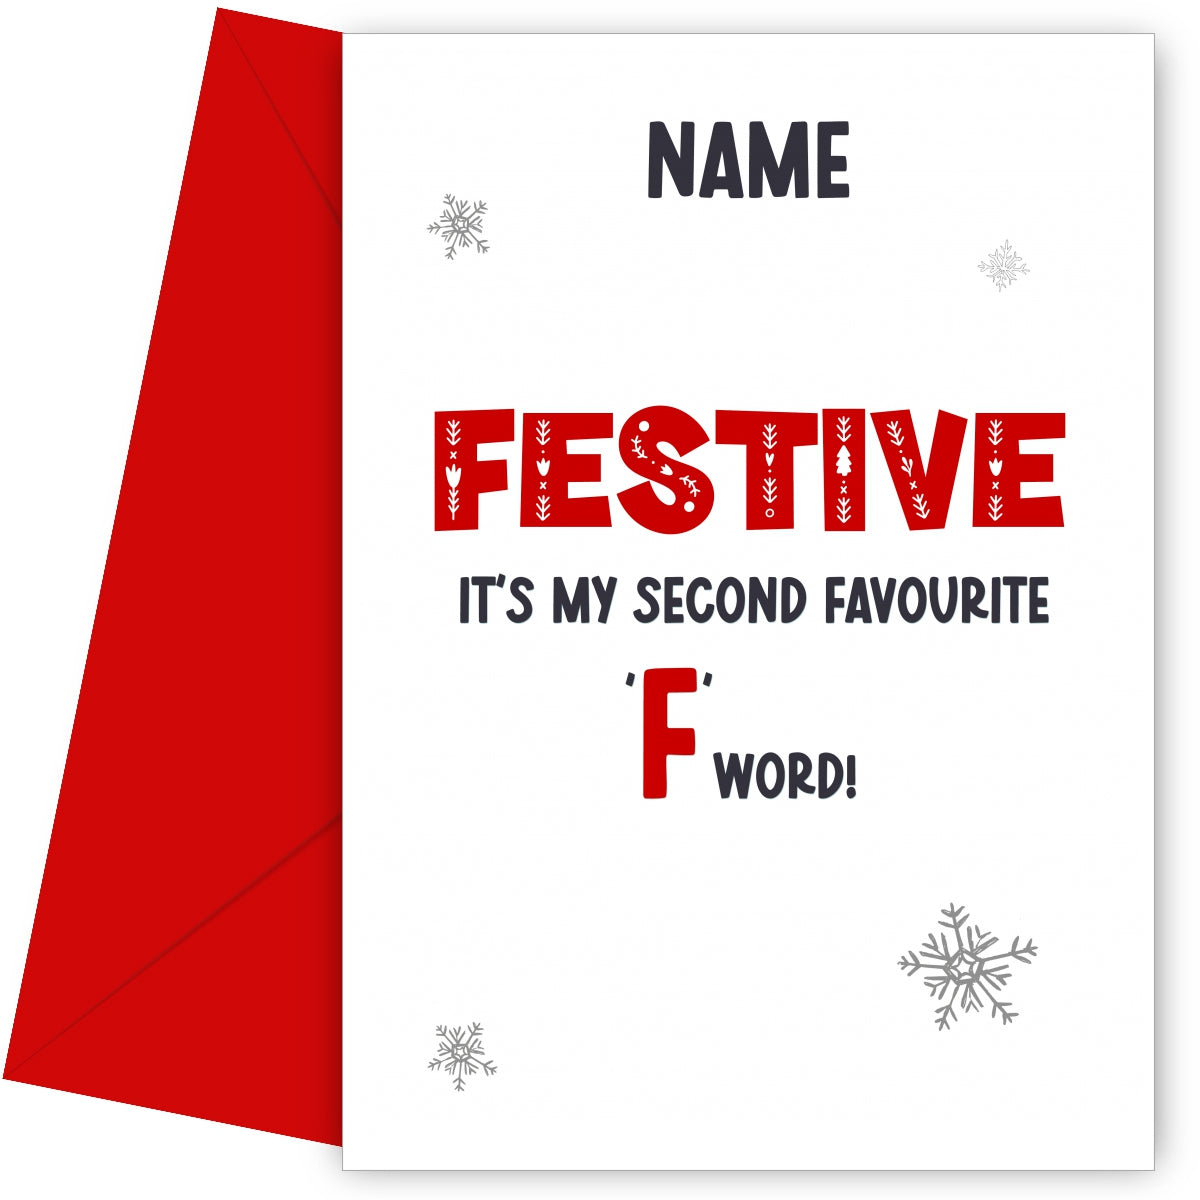 Adult Humour Christmas Card for Friends & Family - Festive is 2nd Favourite F Word!